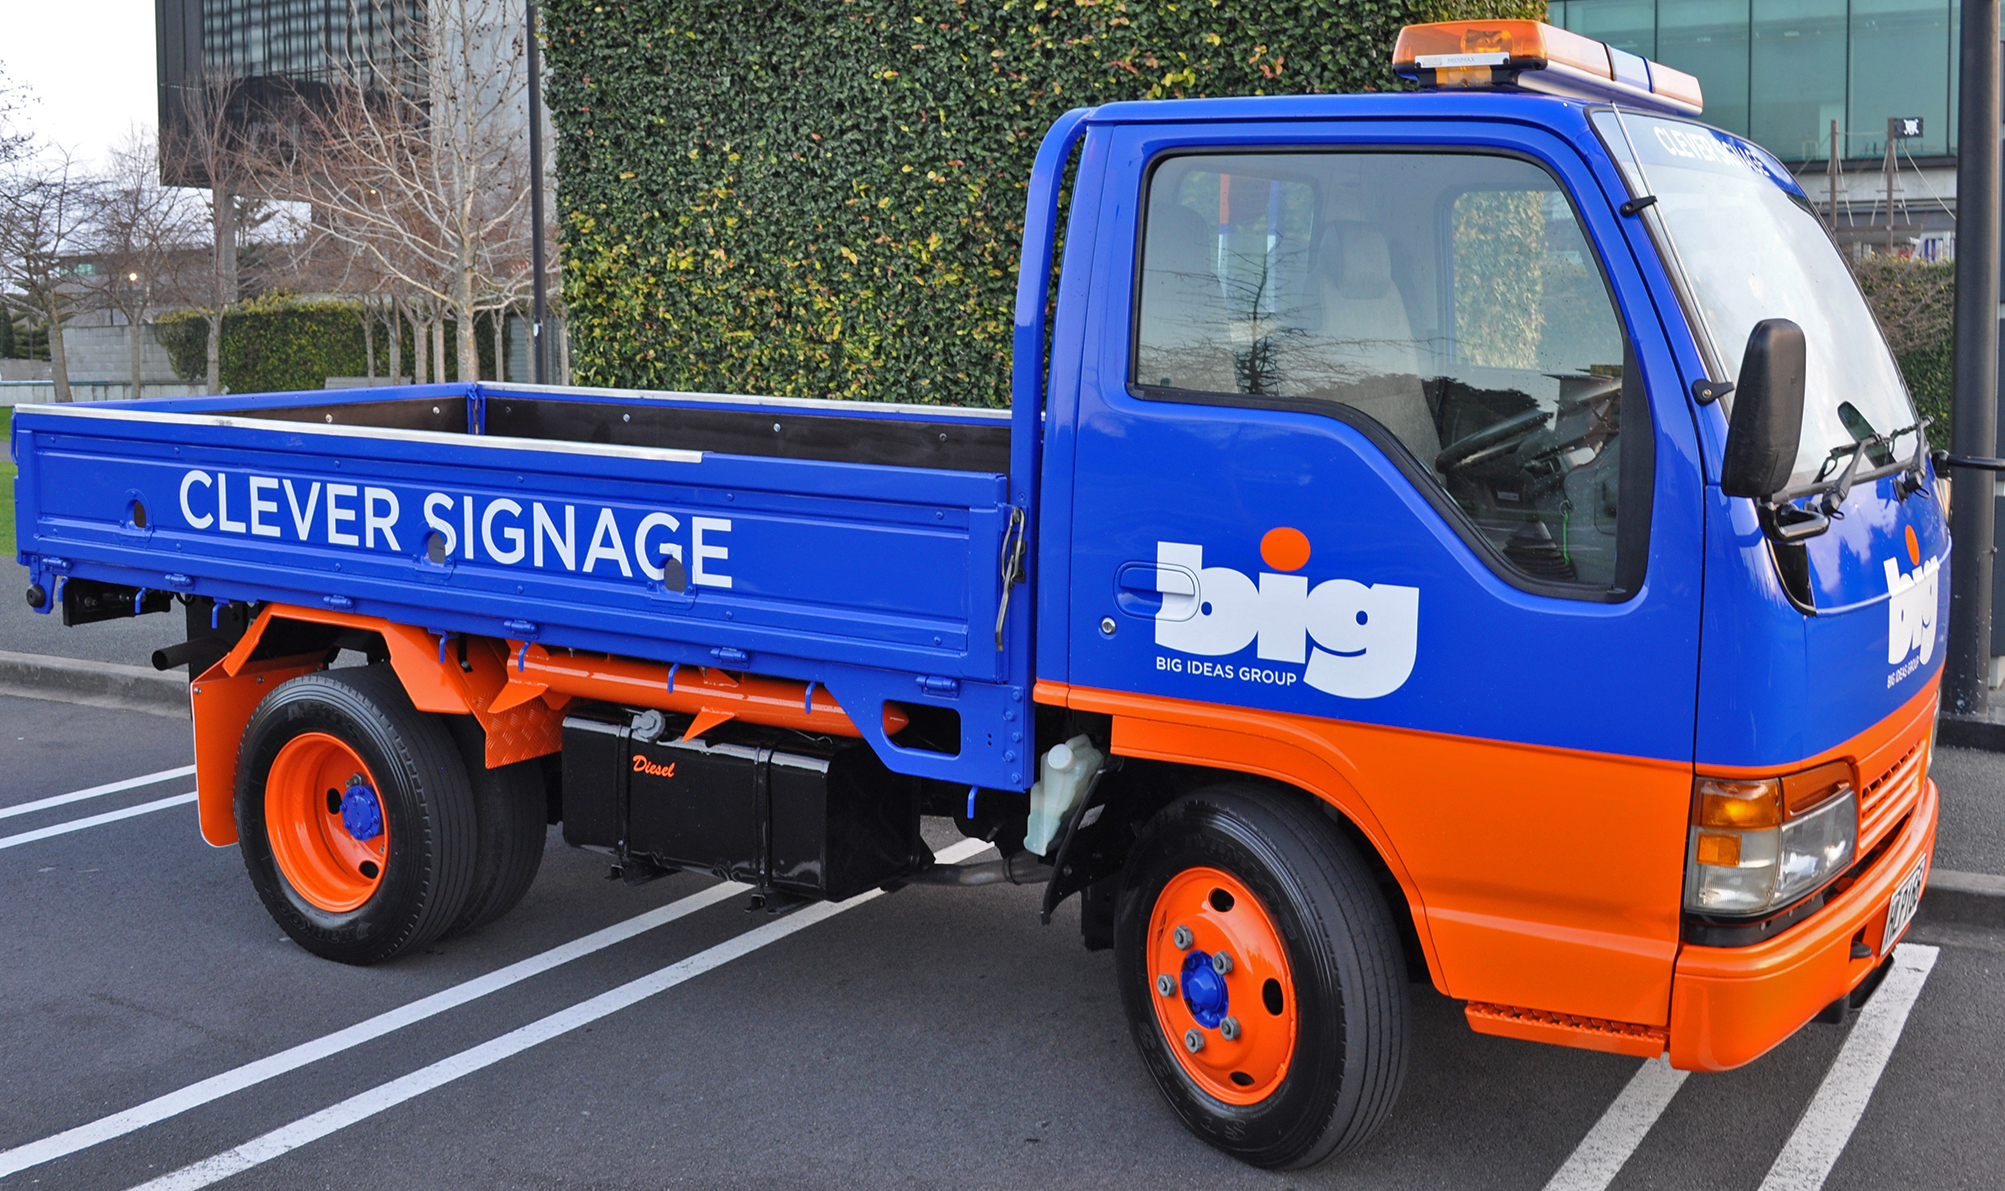 BIG Ideas truck, with blue and orange livery